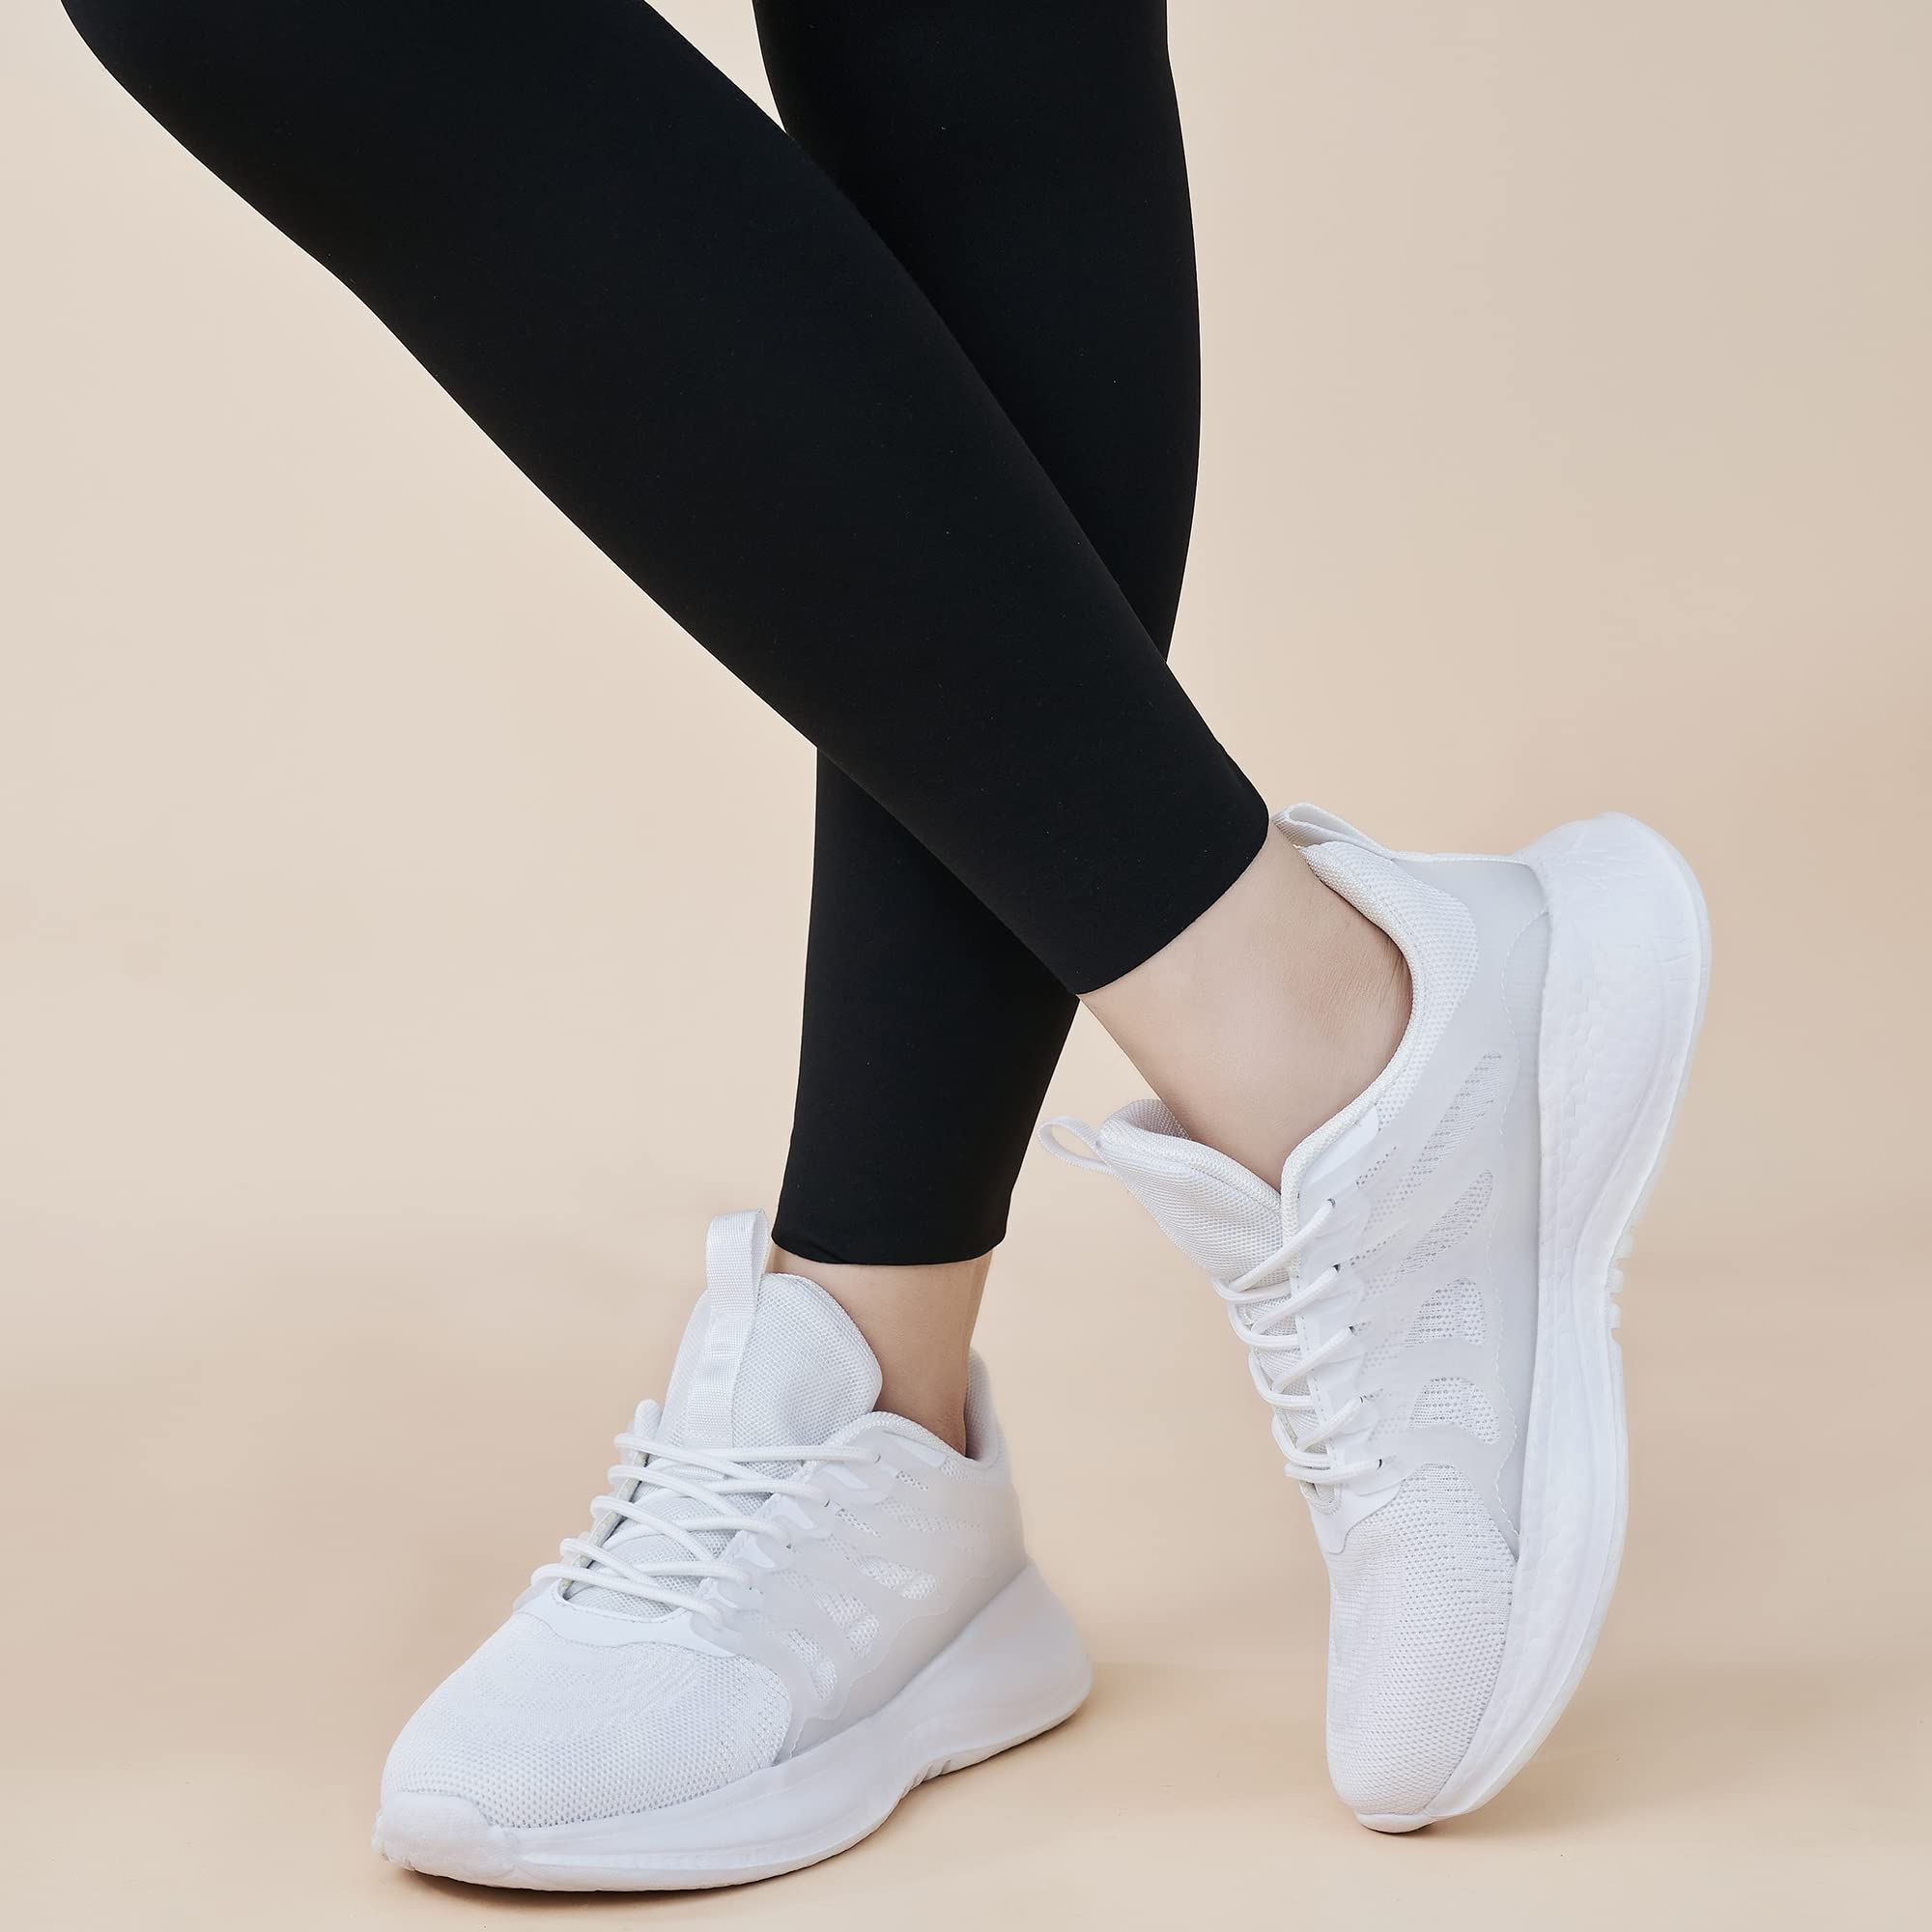 Ablanczoom Sneakers for Women Tennis Shoes Casual Comfortable Slip On Sneakers Women Walking Shoes Non Slip Lace Up Women Footwear White